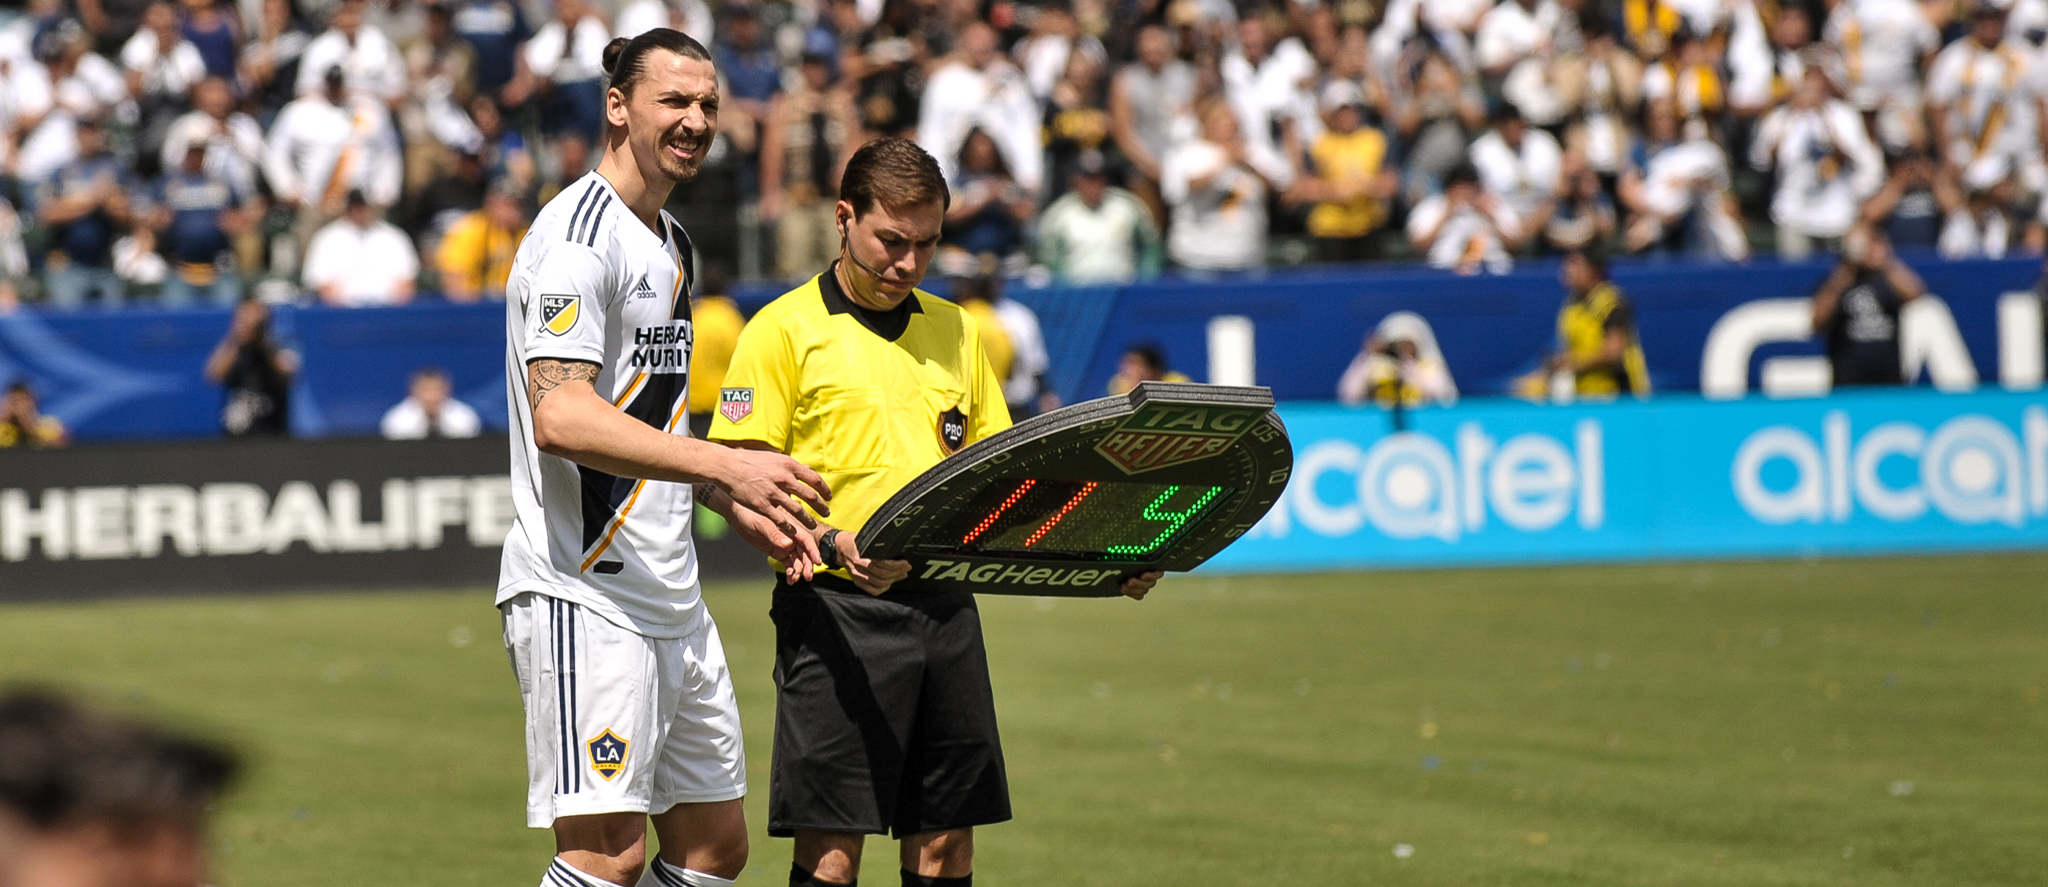 Zlatan Ibrahimovic gets ready to play his first game for the LA Galaxy on March 31, 2018 - Photo by Steve Carrillo